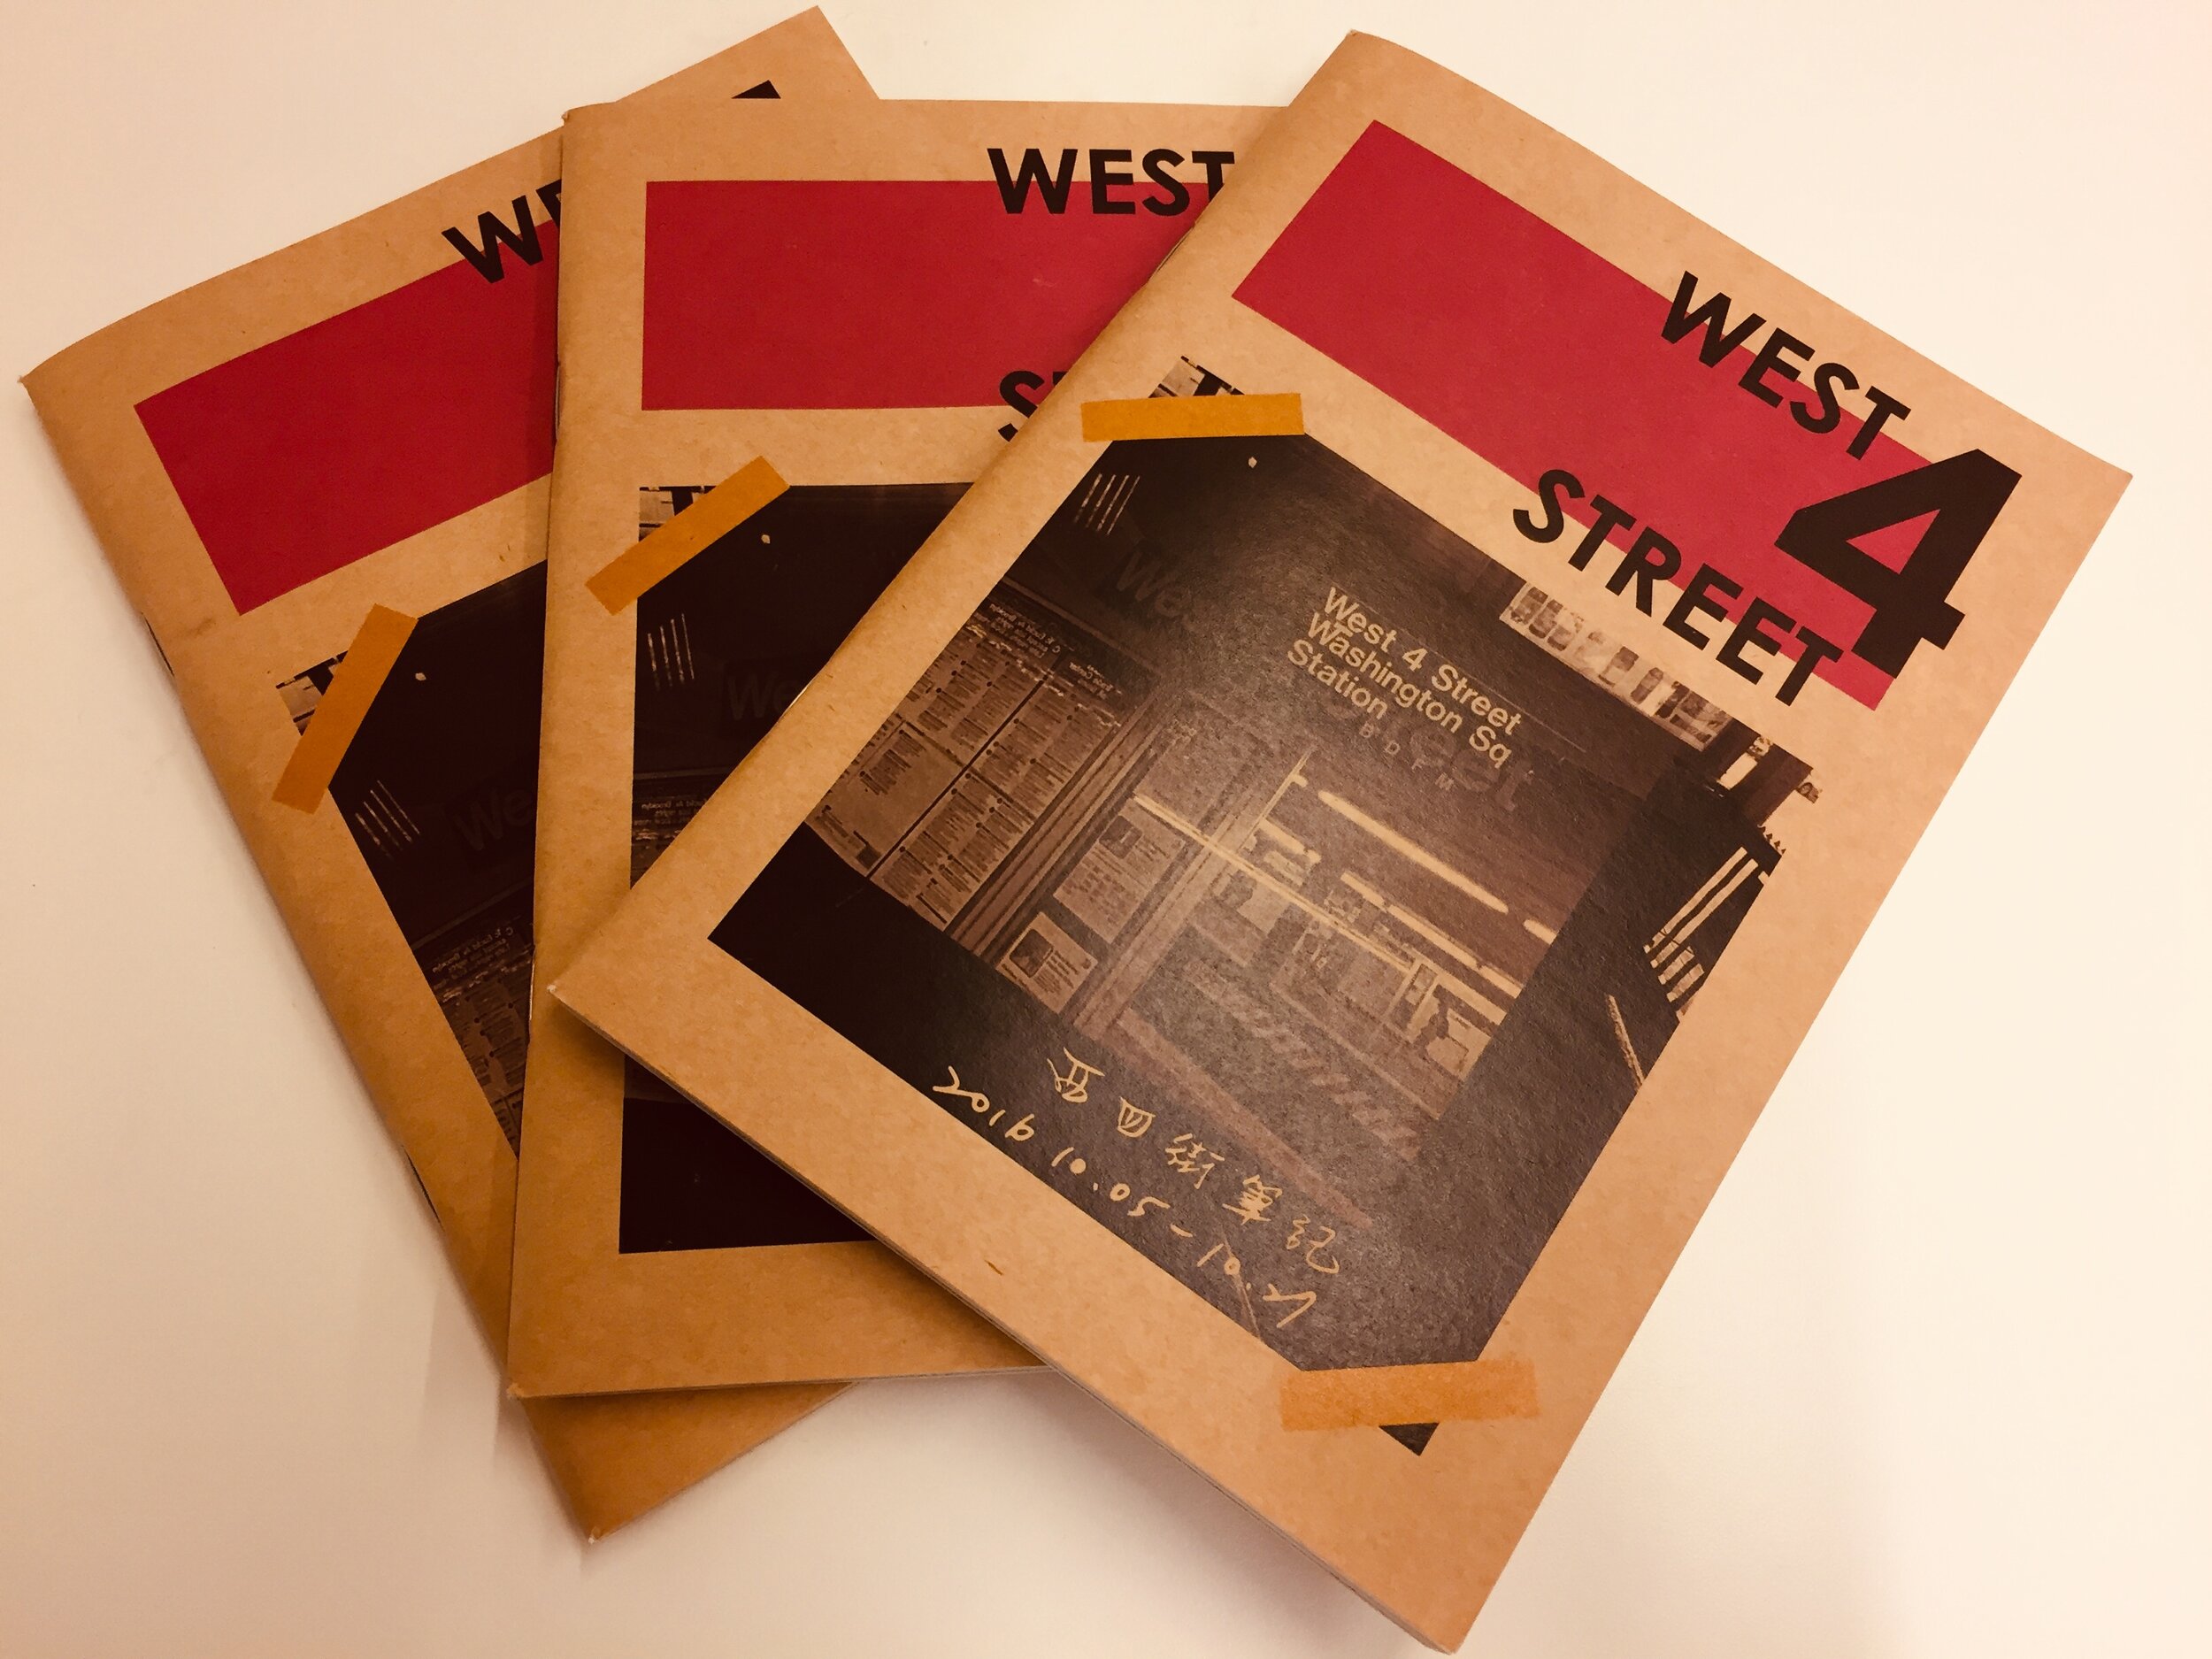 "West 4th Street Diaries" published independently in Taiwan